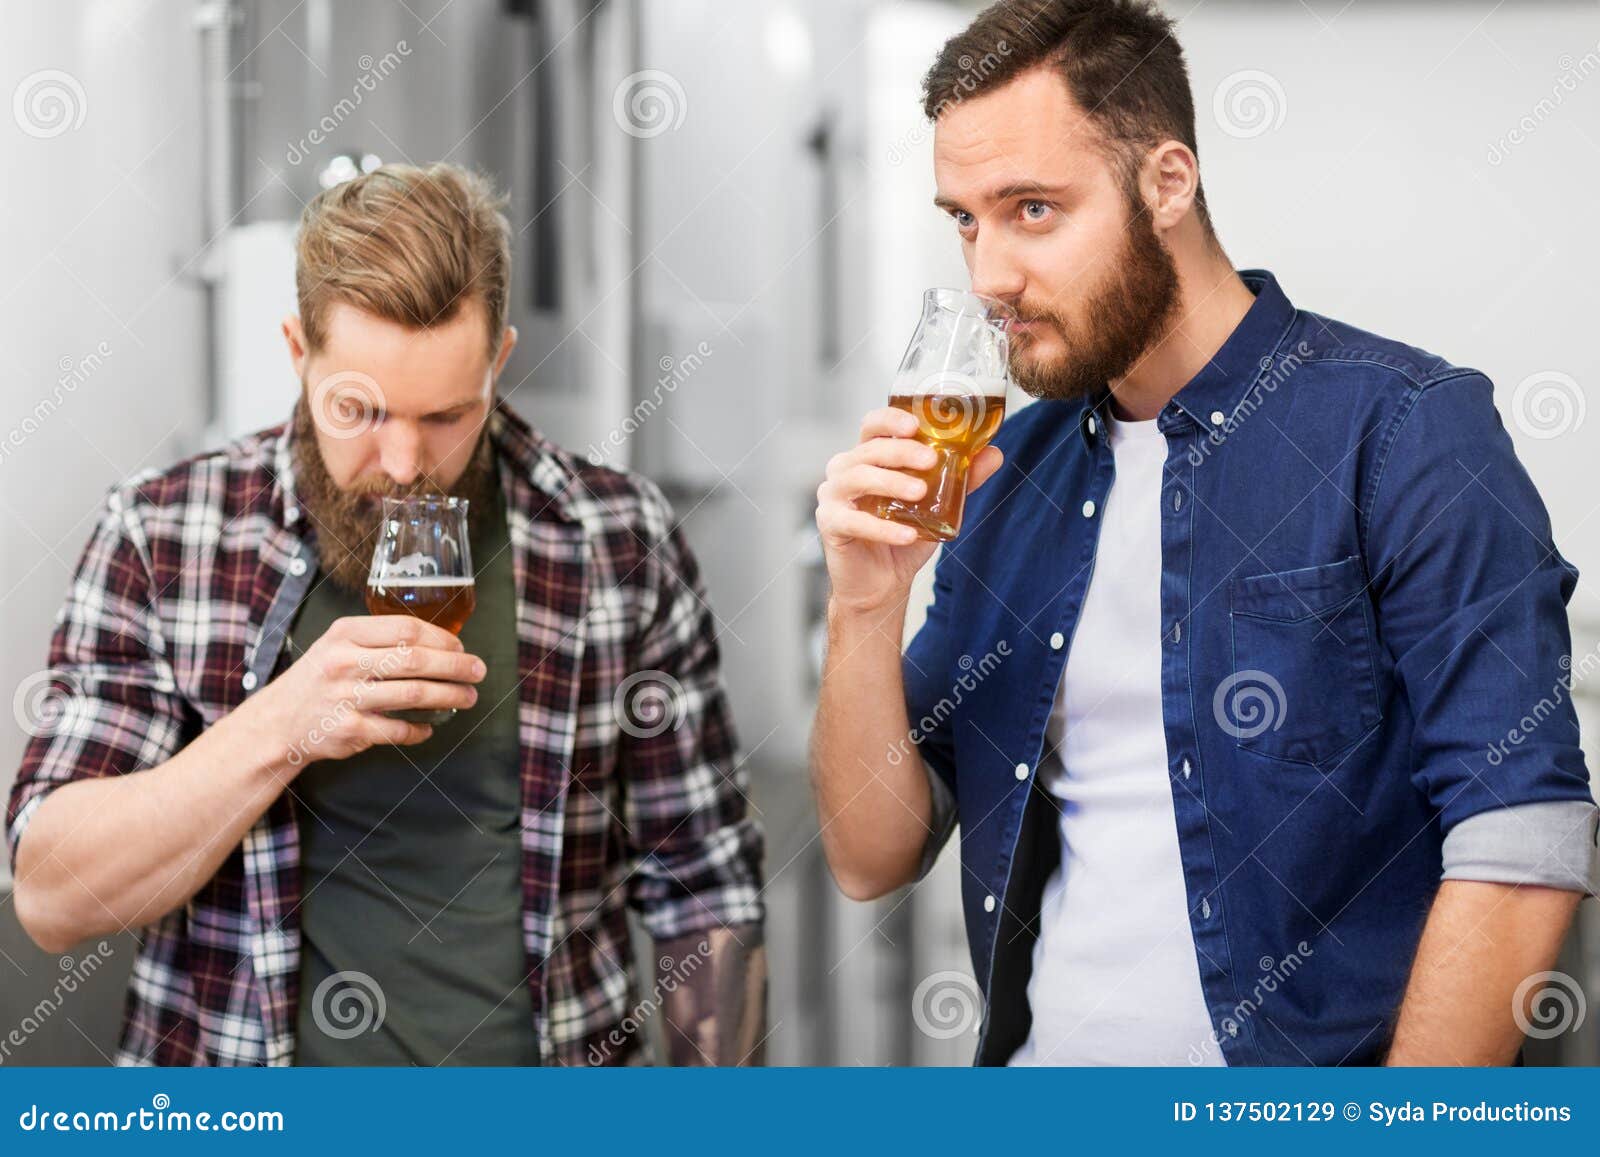 Men Drinking and Testing Craft Beer at Brewery Stock Image - Image of ...